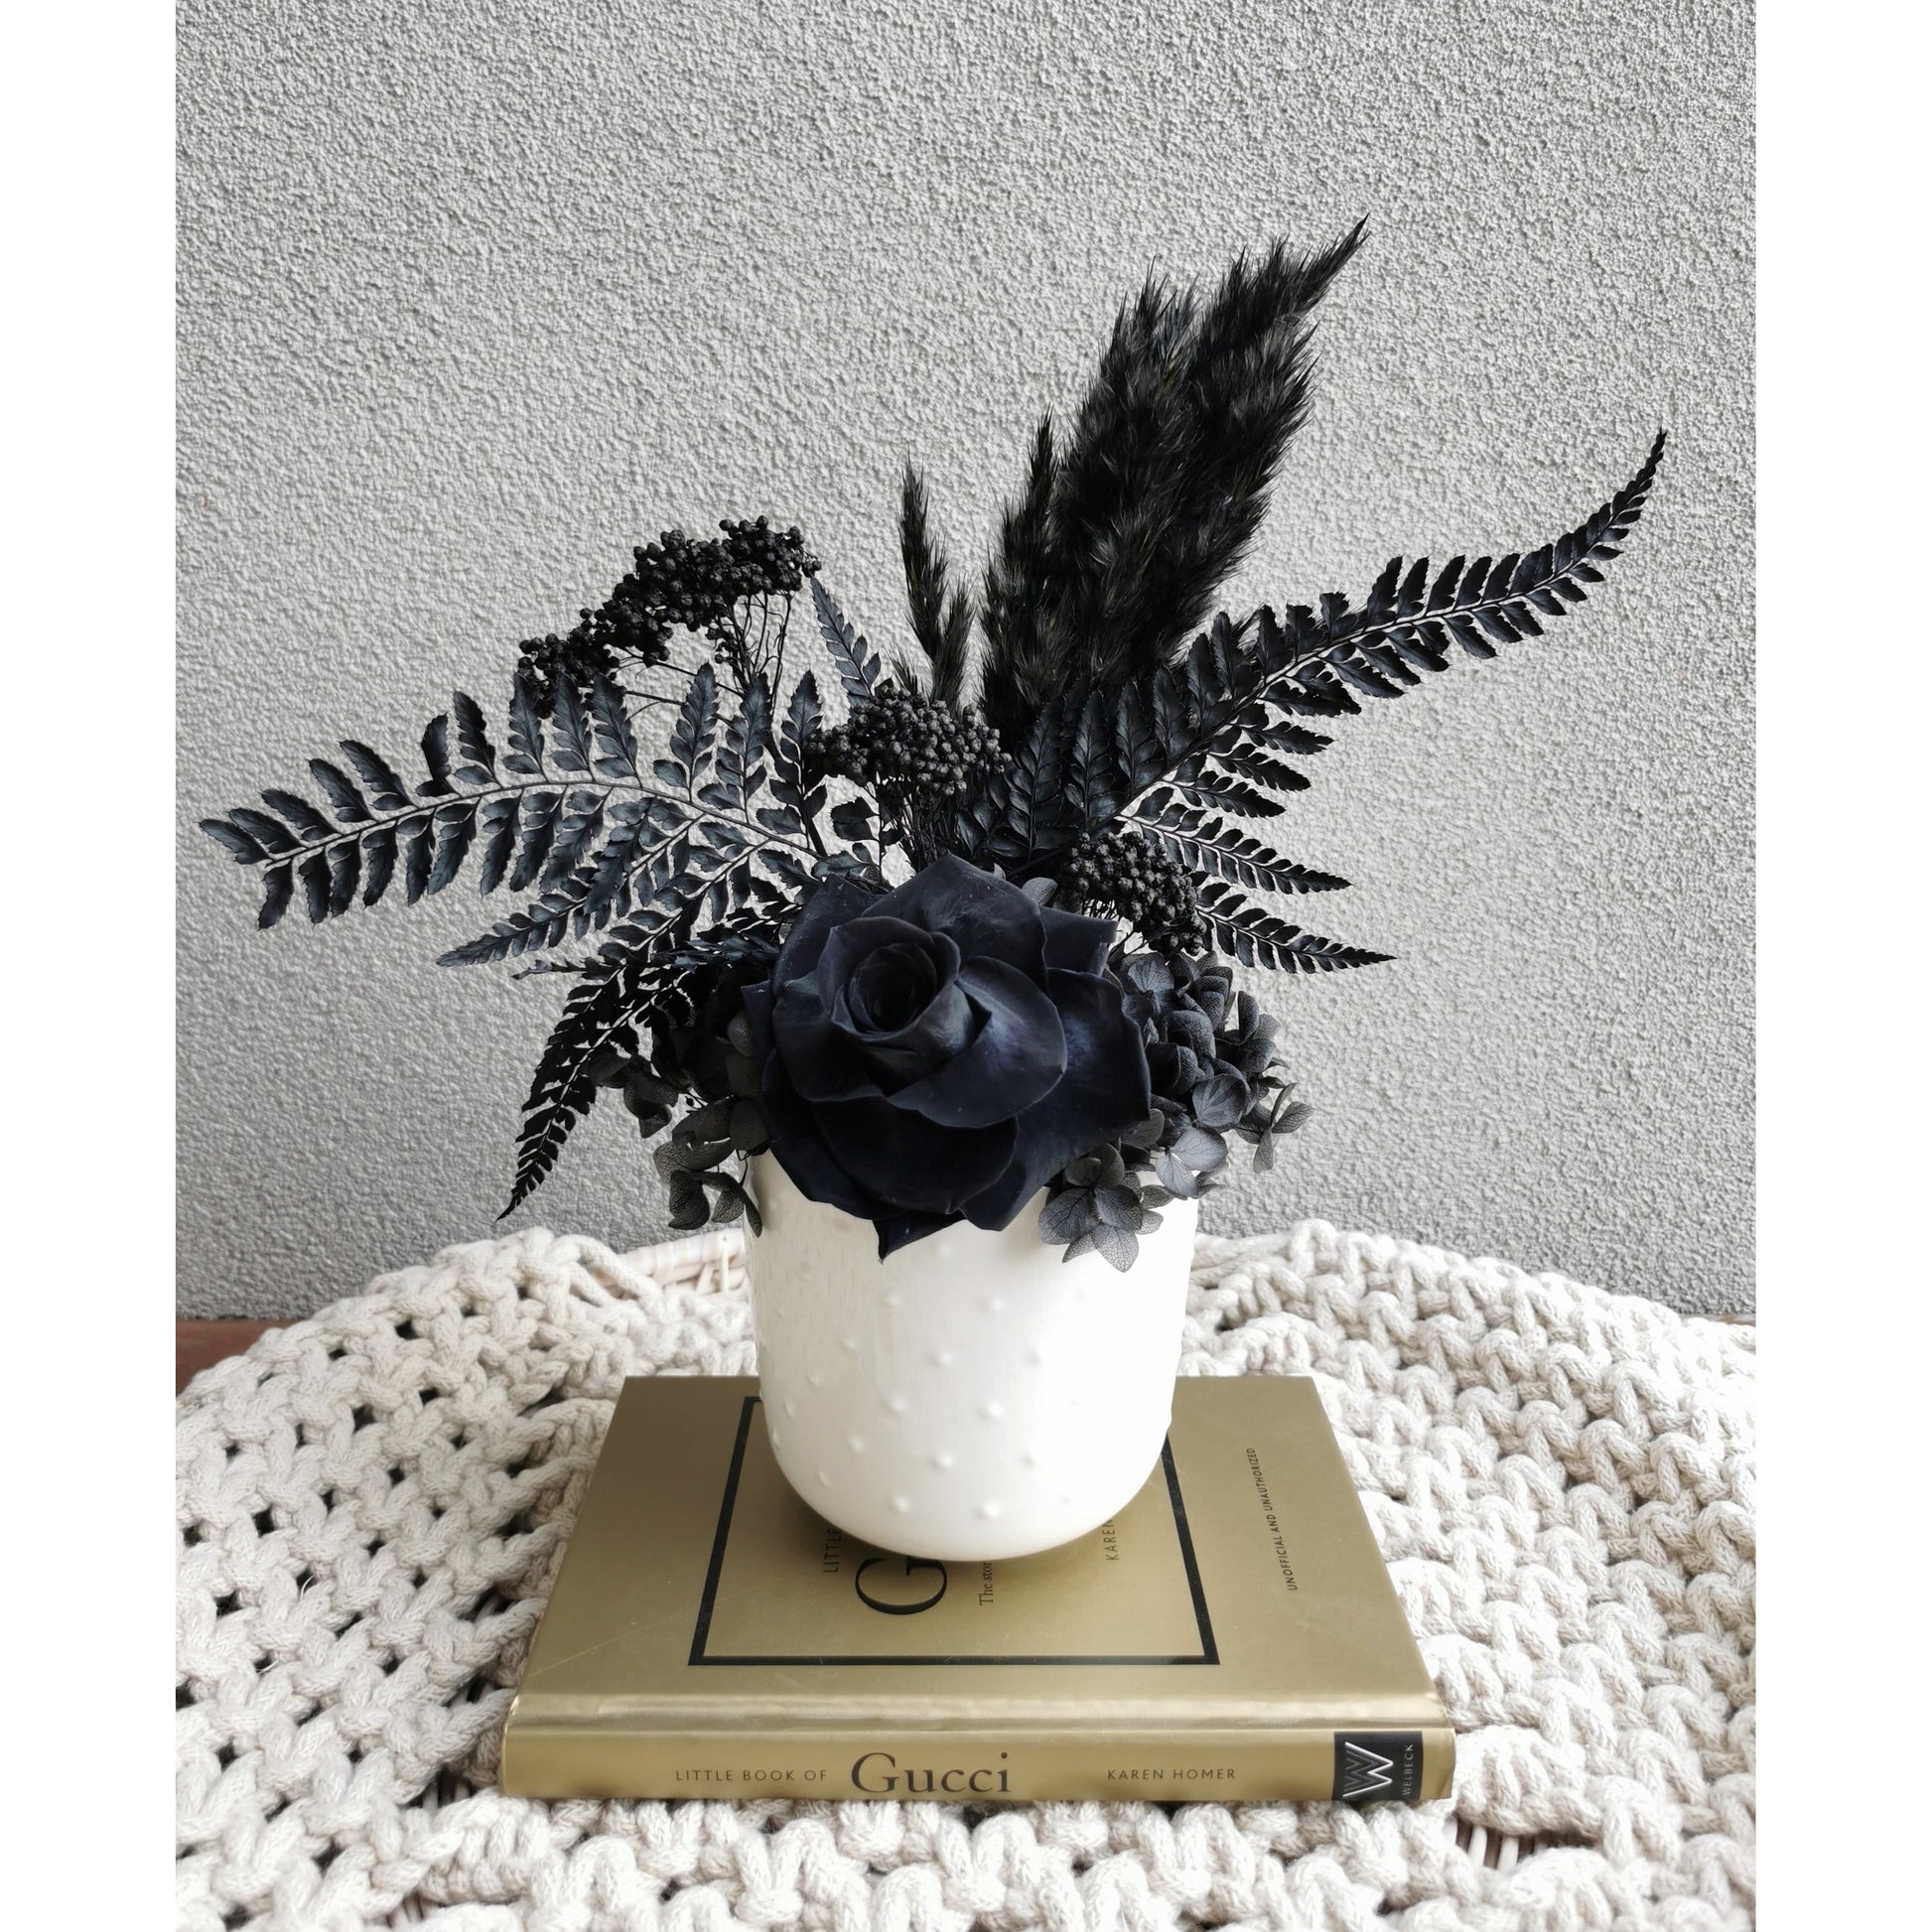 Dried & Preserved flower arrangement featuring all black flowers including a rose, pampas grass, hydrangea, rice flower & ferns. Photo shows arrangement sitting on a book on a table against a blank wall